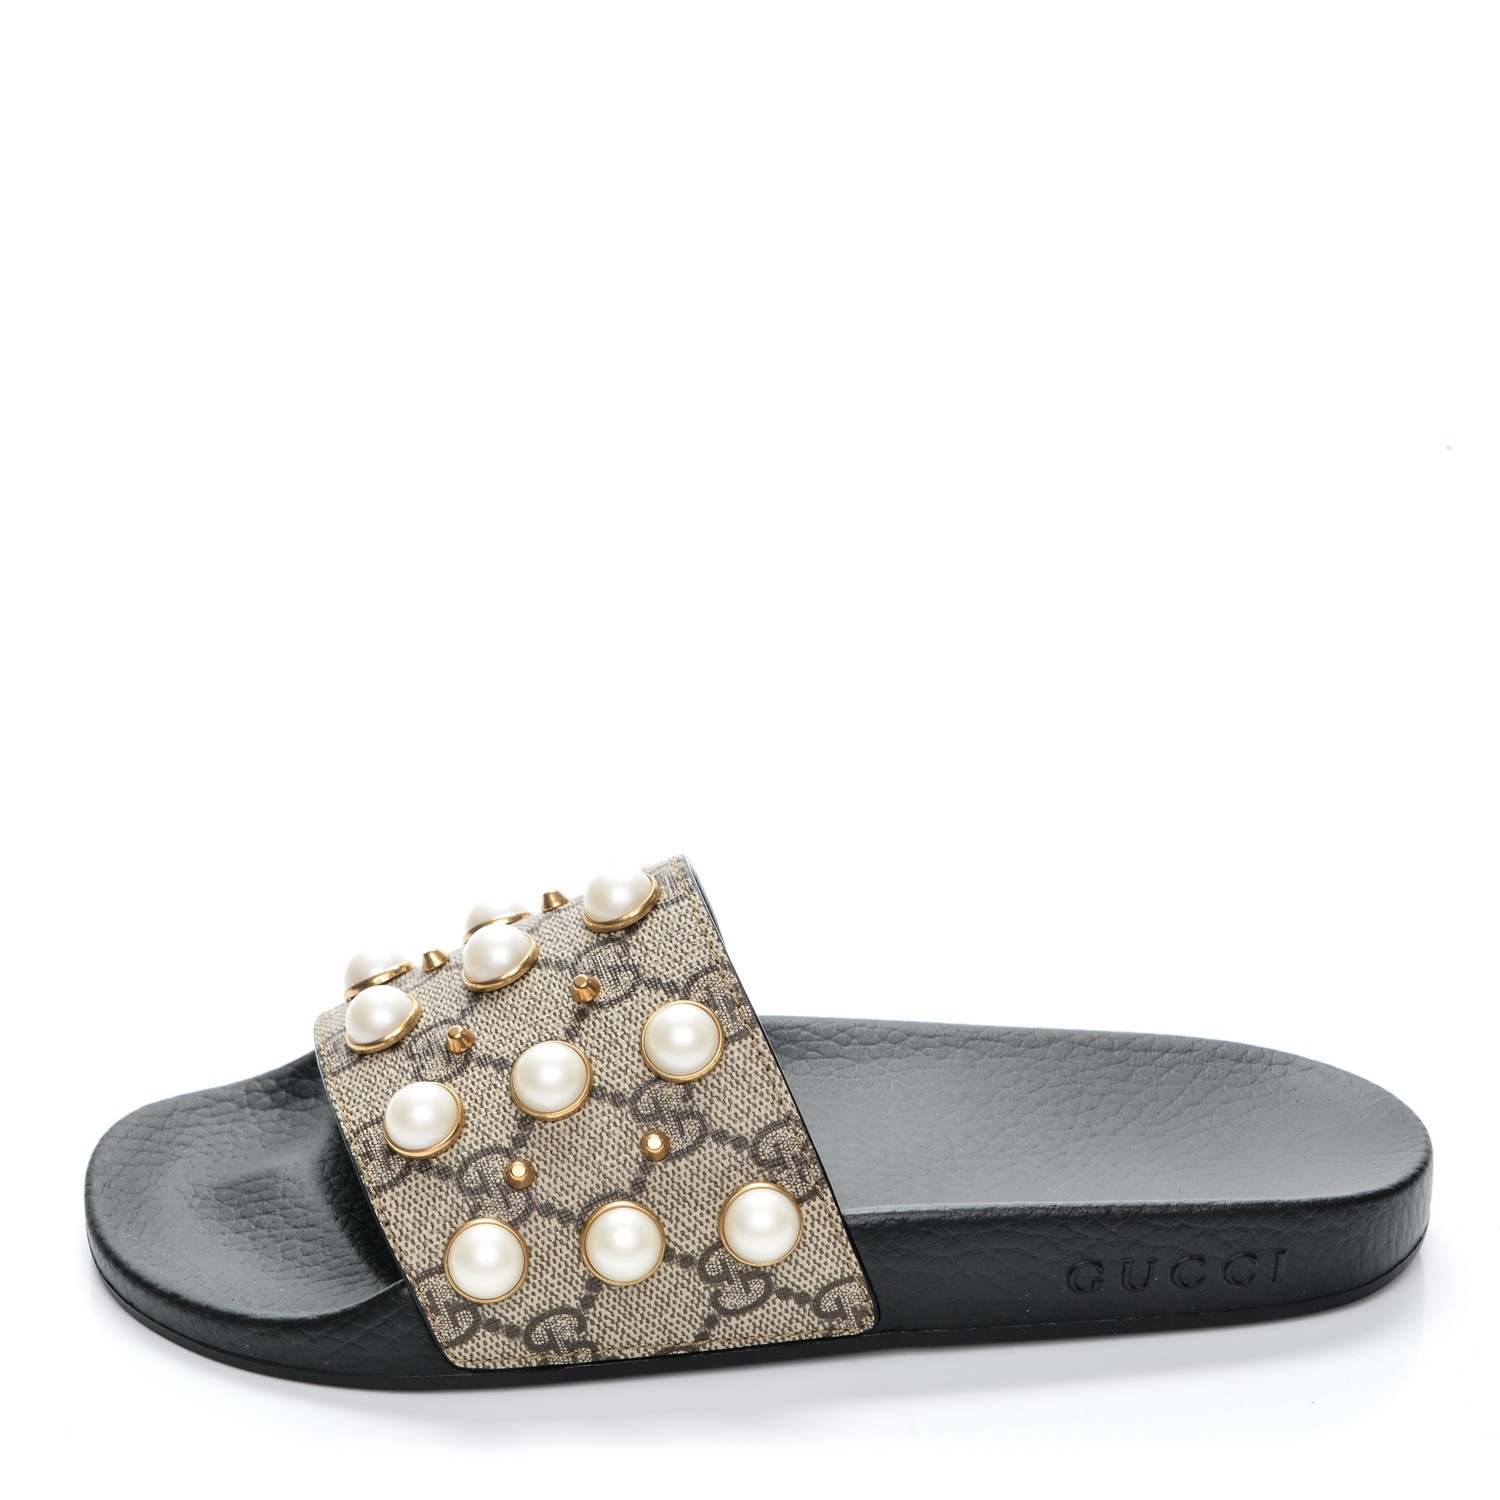 gucci pearl sandals, OFF 76%,Cheap price!